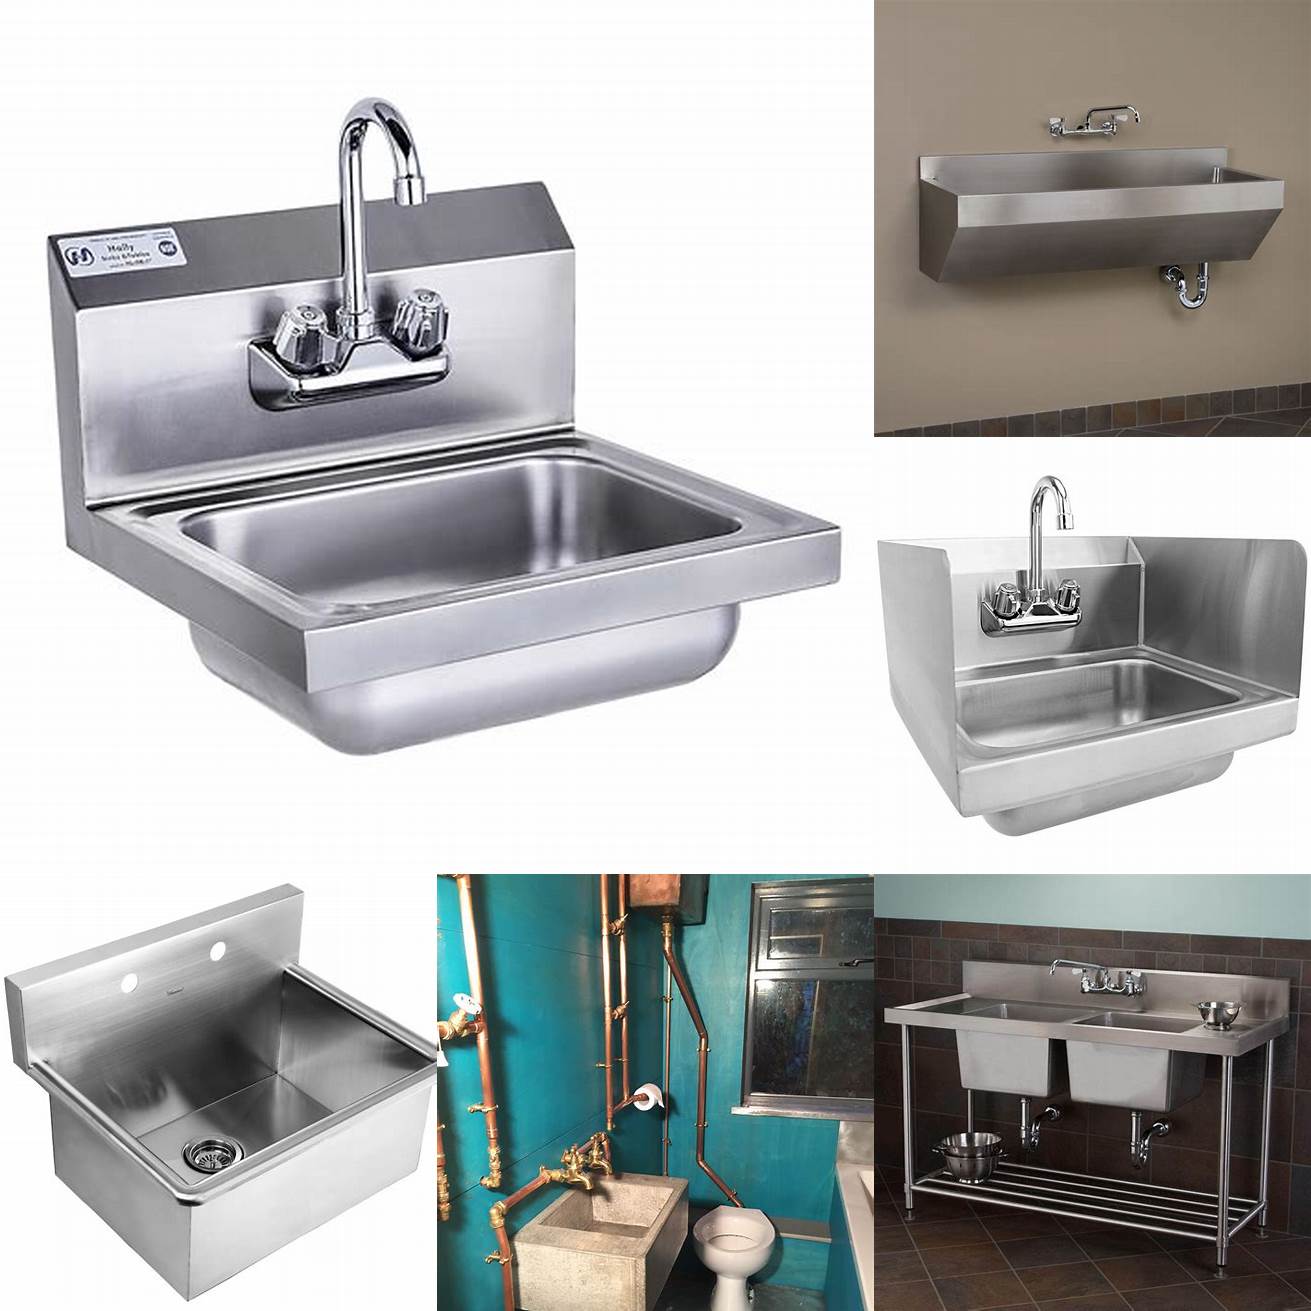 Industrial wall-mounted sink cabinet with metal pipes